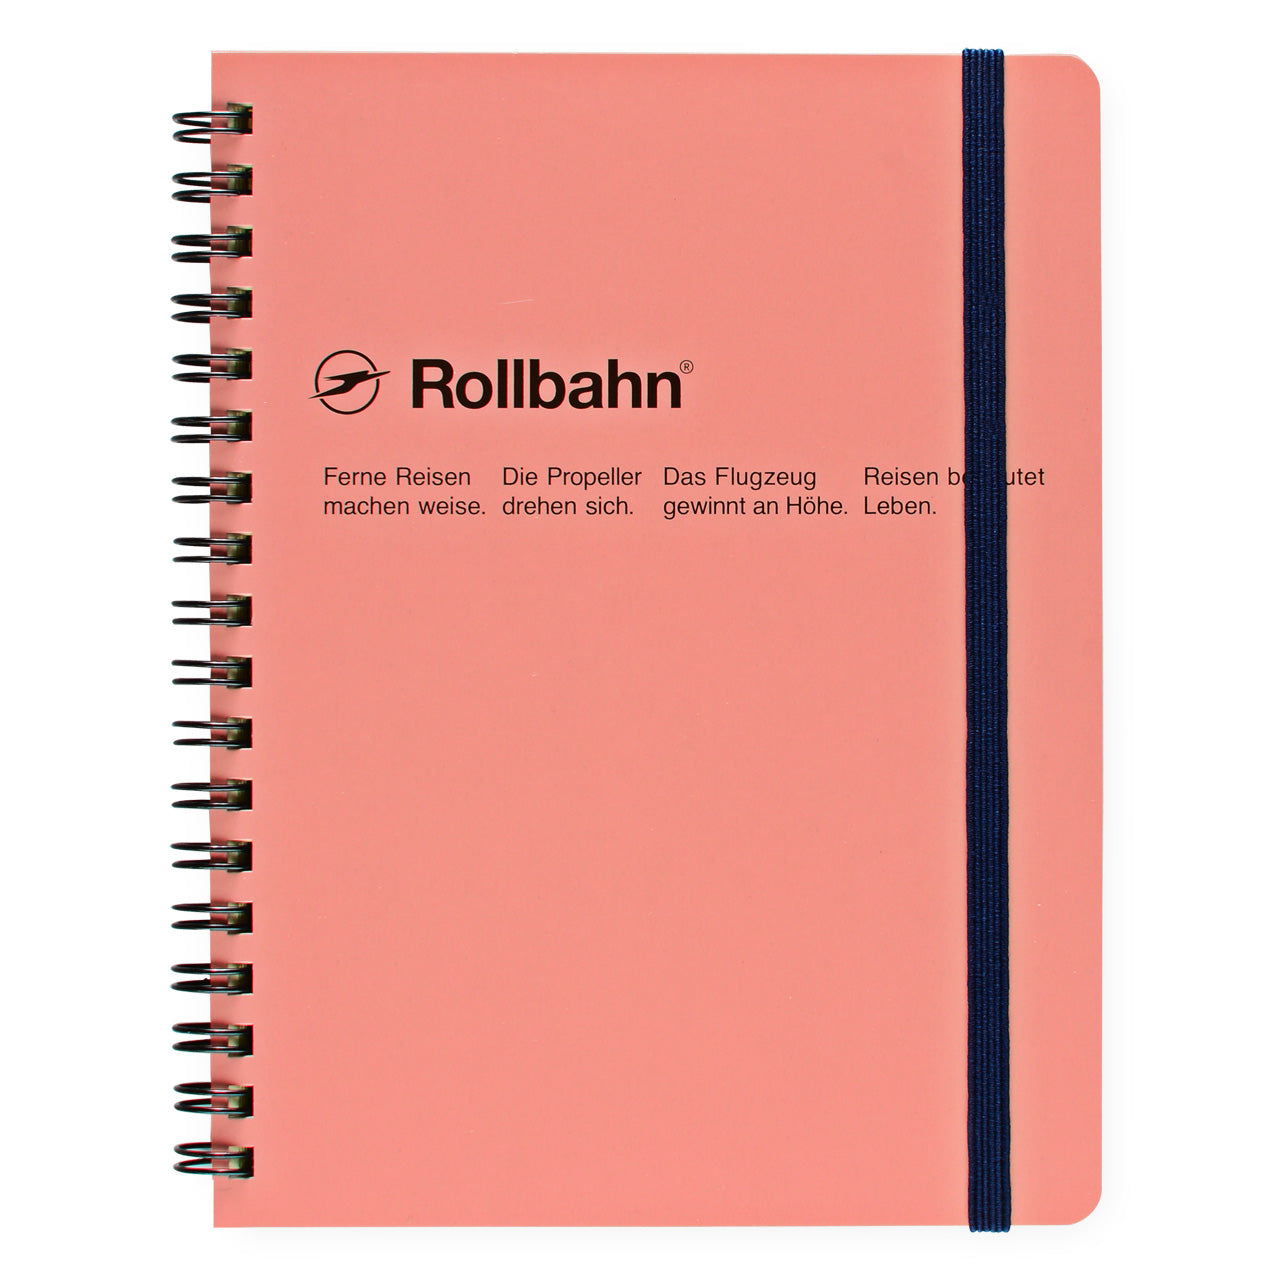 Delfonics Rollbahn Notebook Small, Large Or A5 | 9 Colors Blush Pink / Small (4.5 x 5.5")